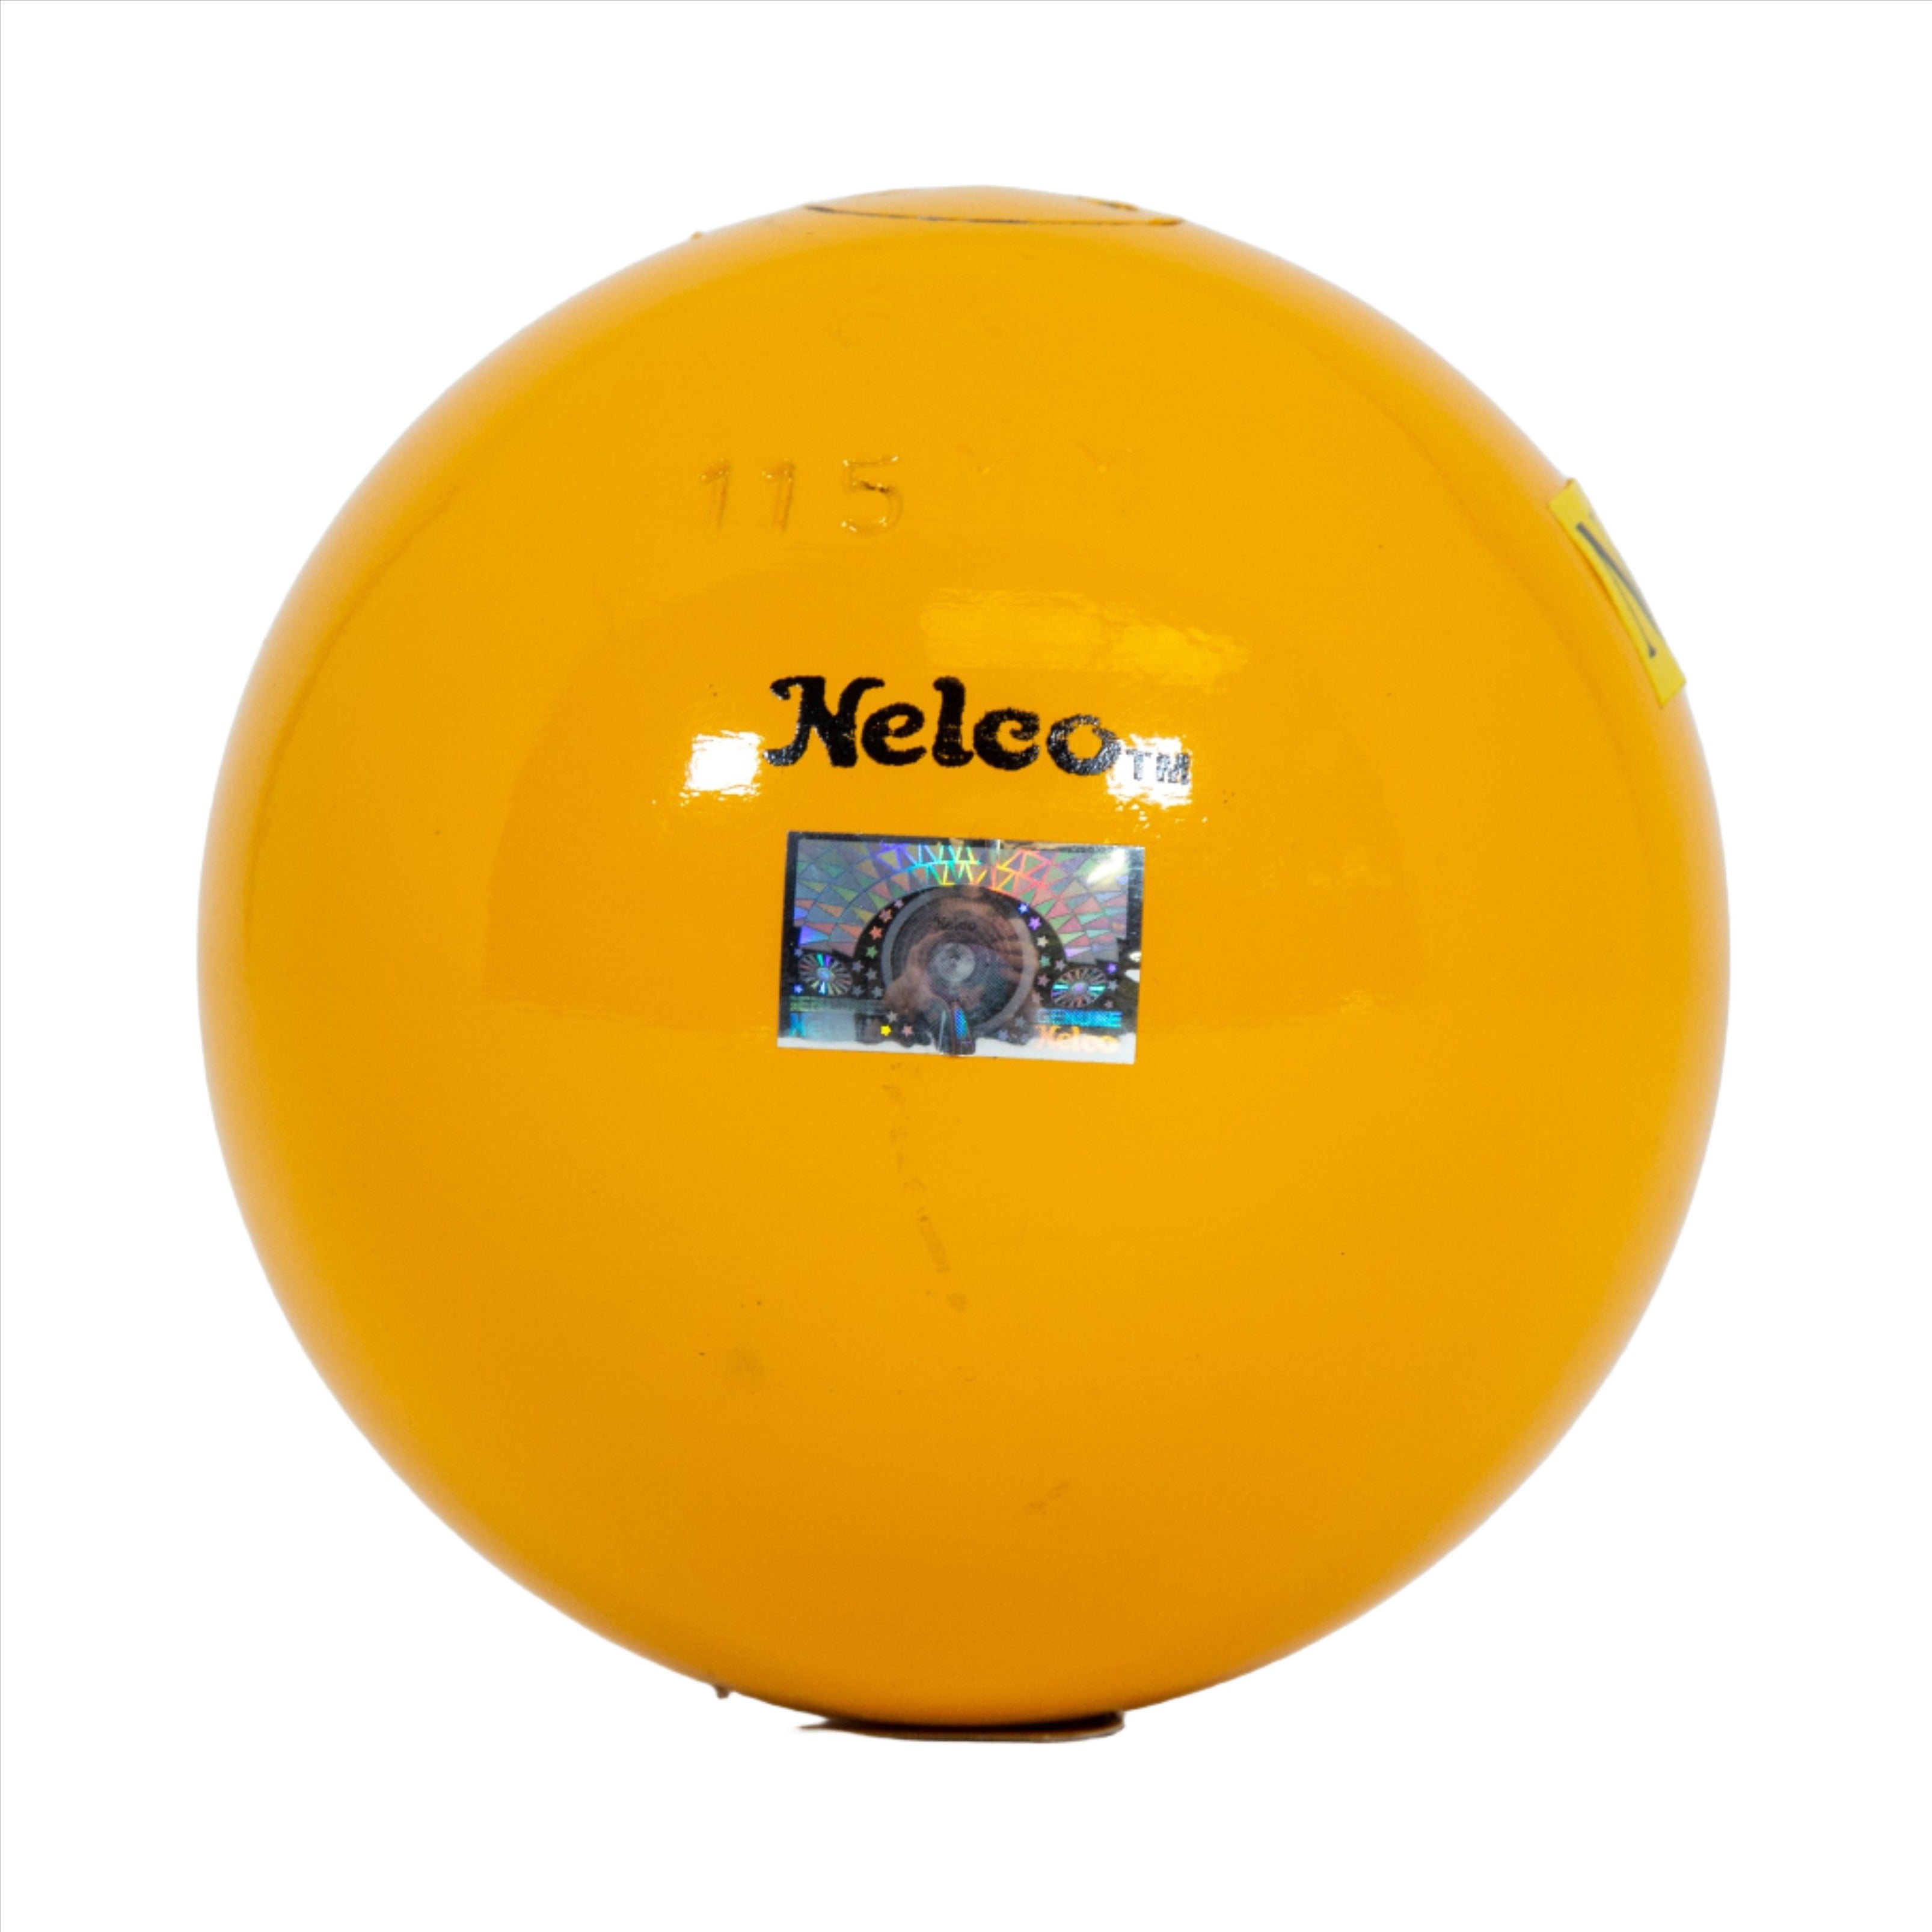 Nelco steel shot turned to a specific diameter | Athletics equipment